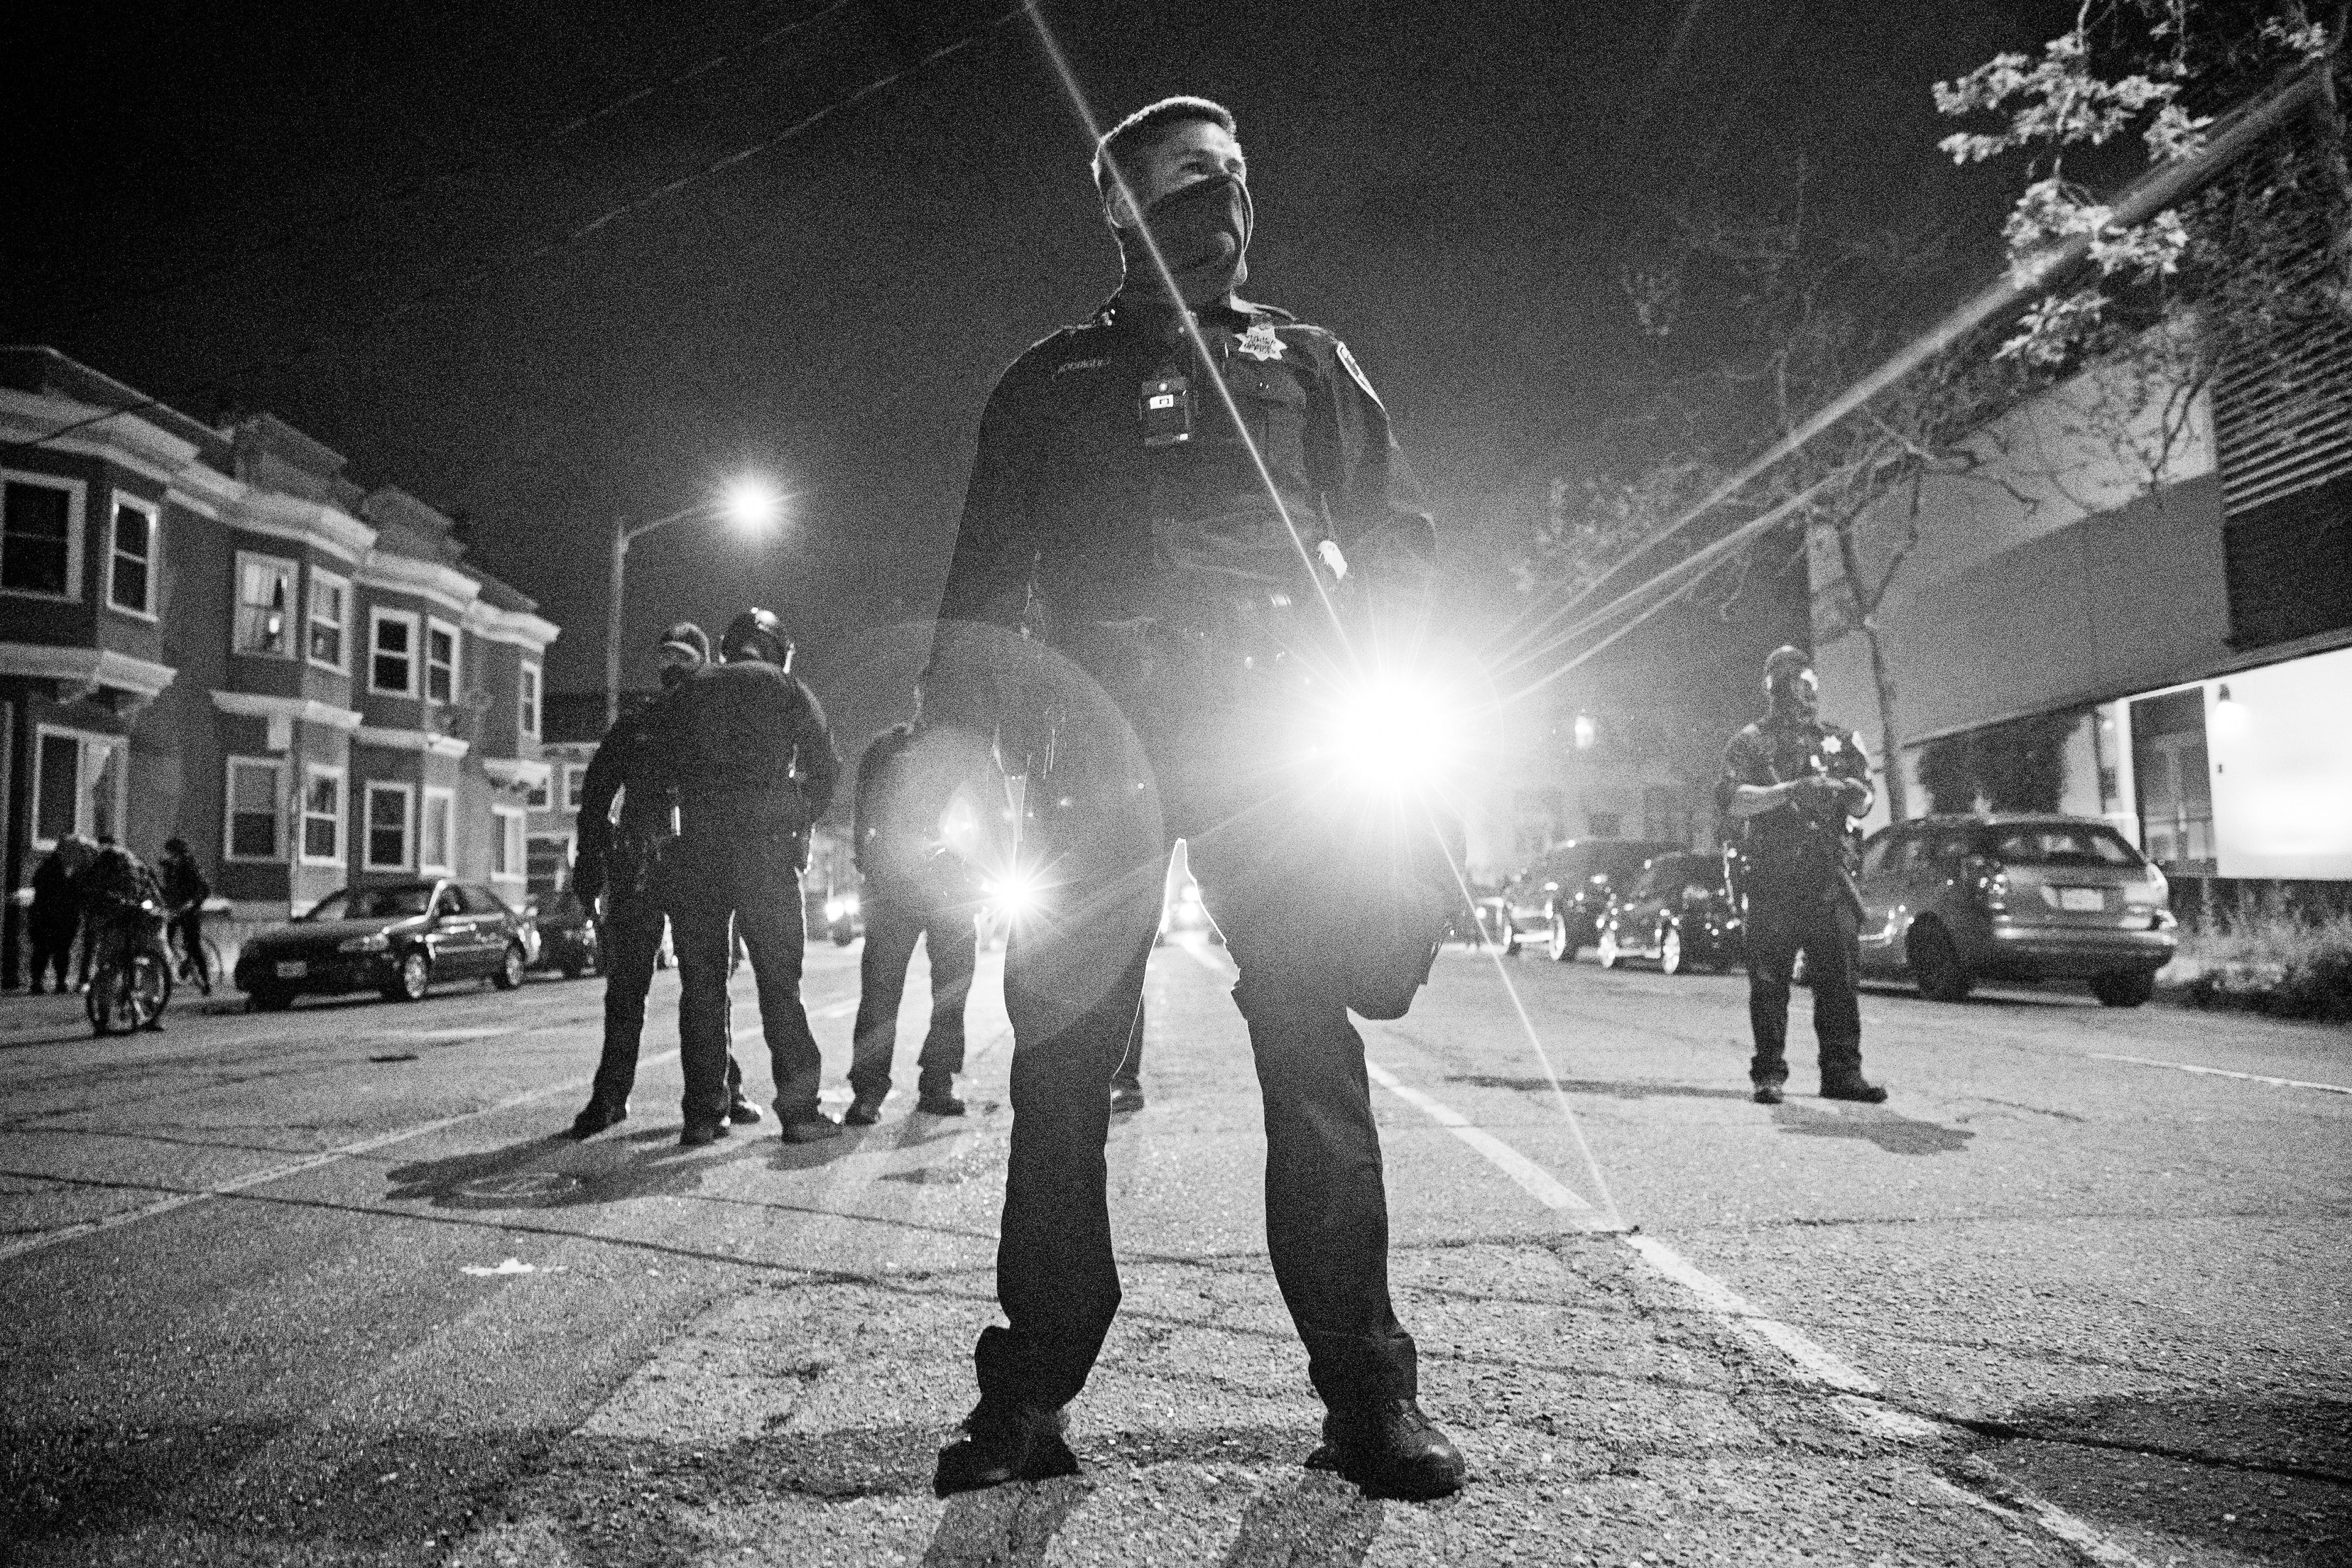 A group of police officers stands in the middle of a street at night, with one officer in the foreground shining a bright flashlight toward the camera.